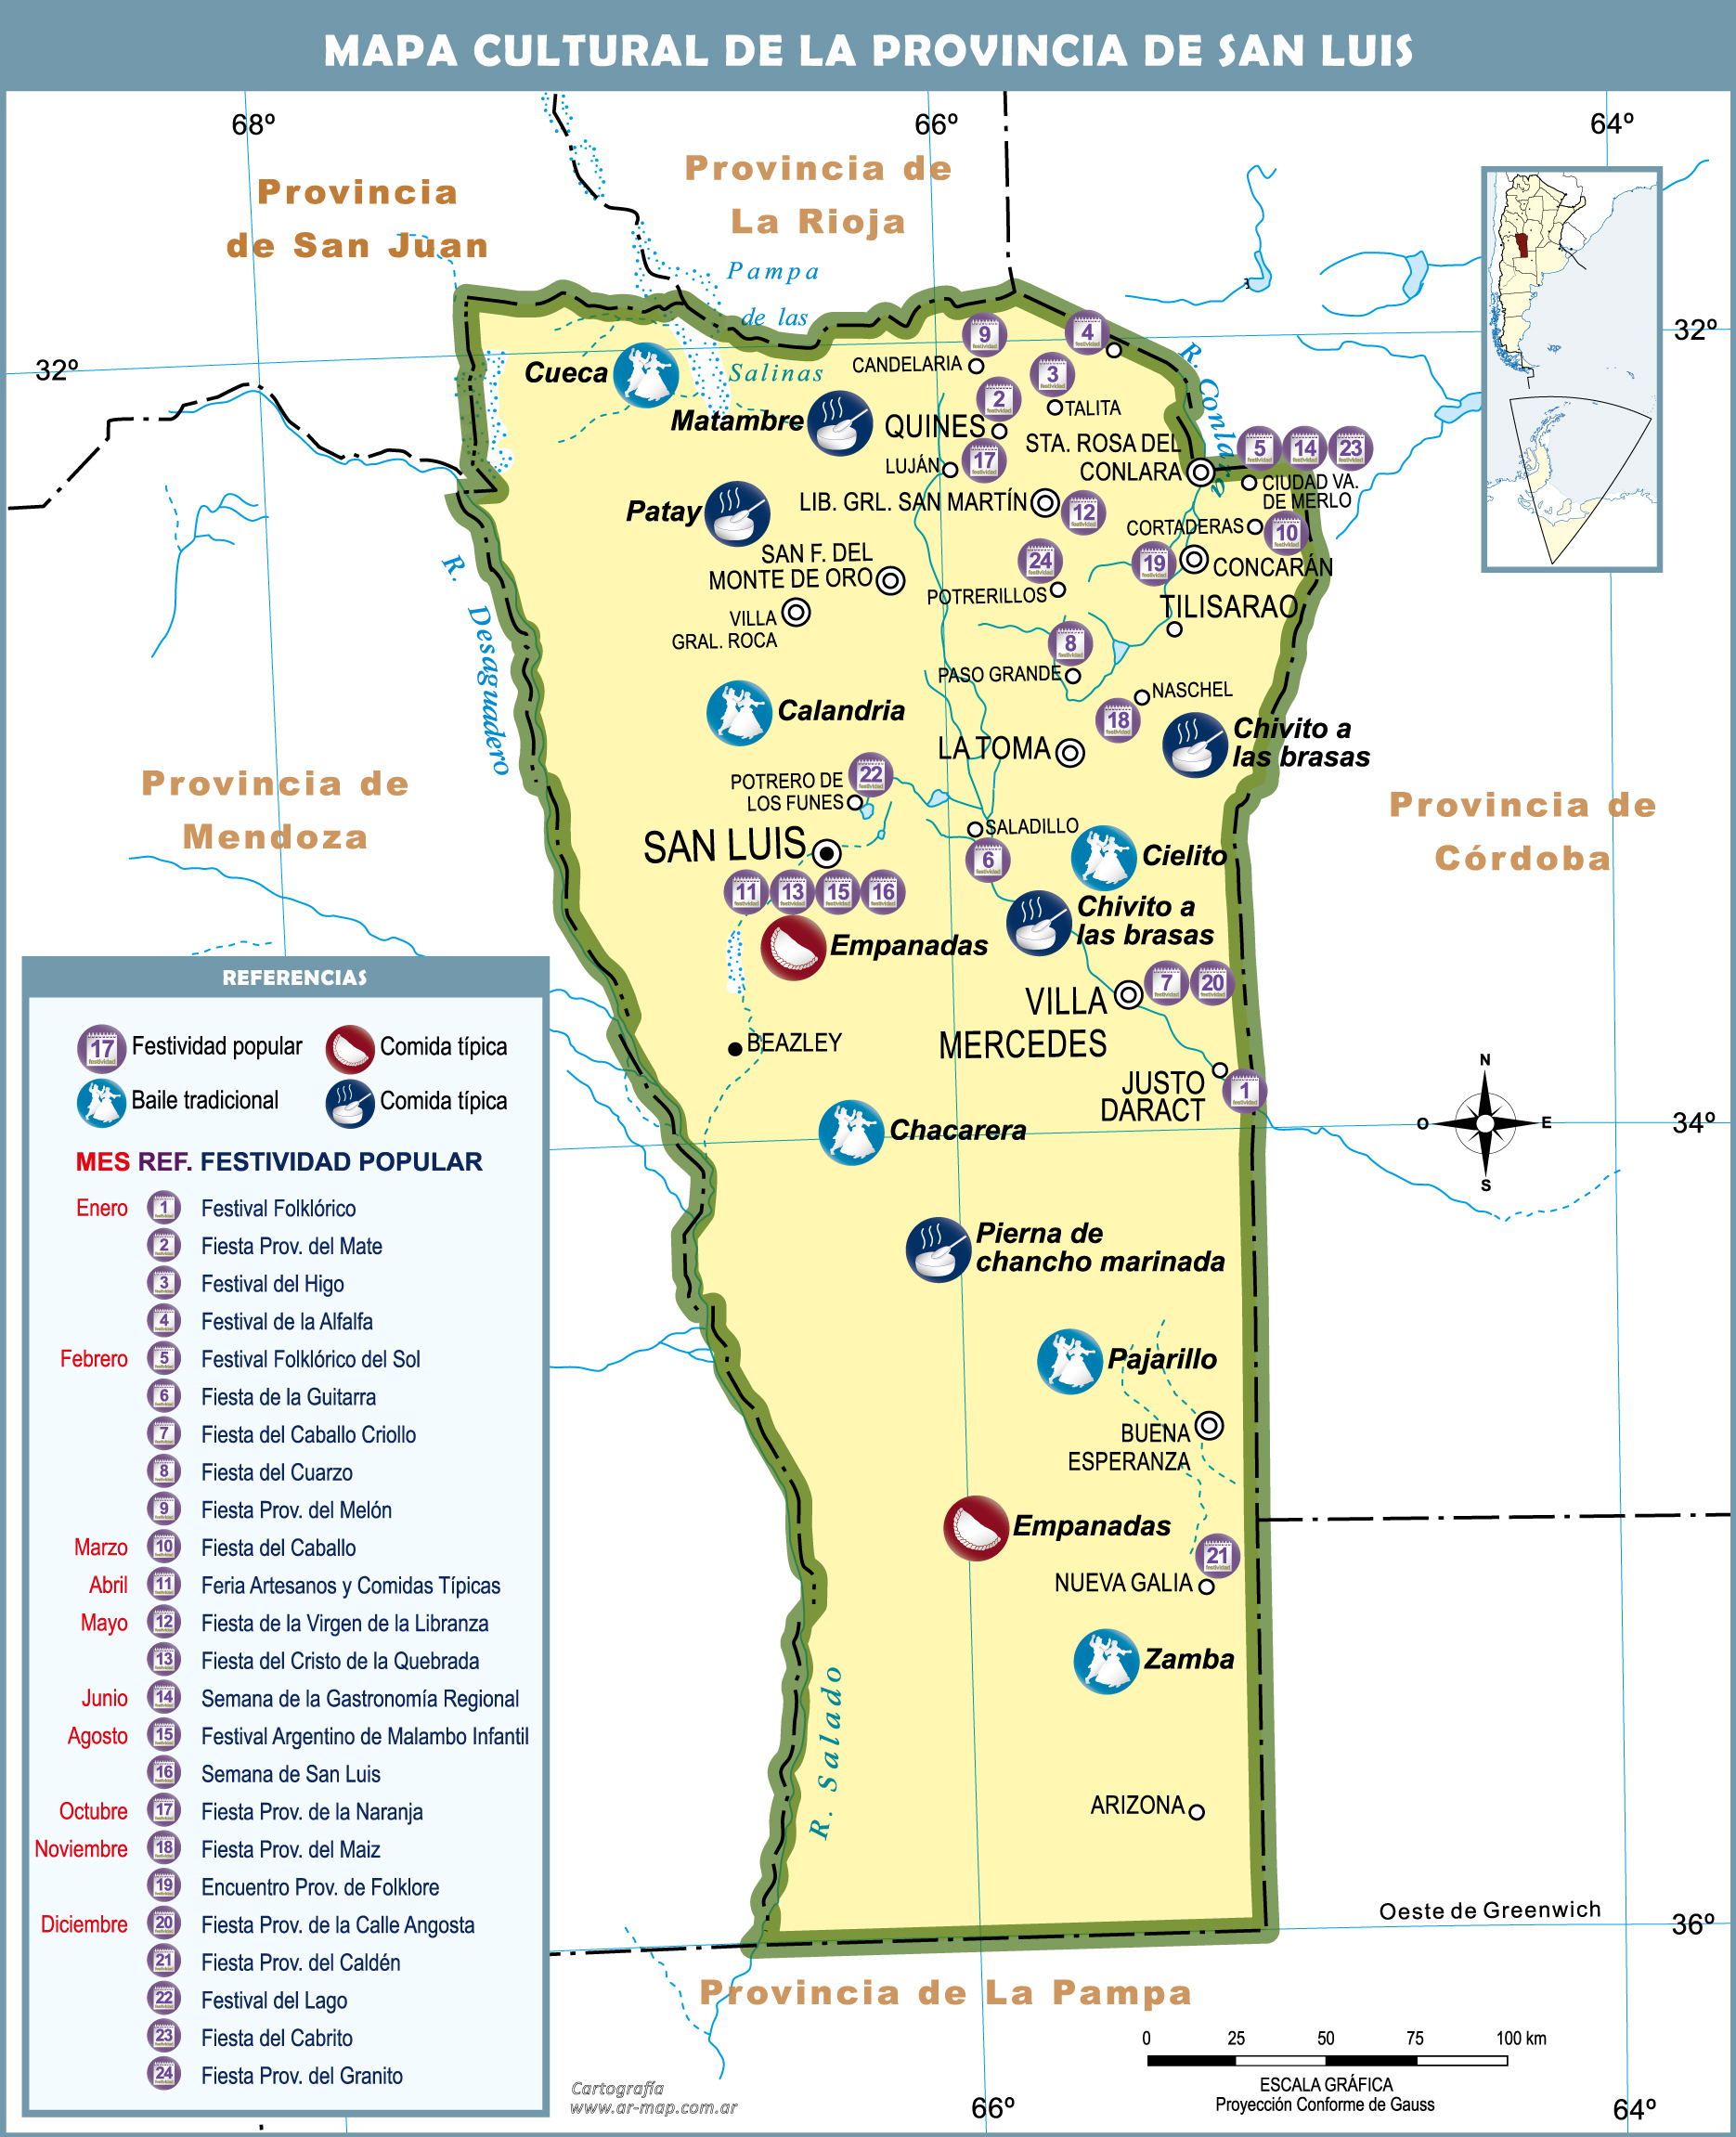 Cultural map of the Province of San Luis, Argentina | Gifex